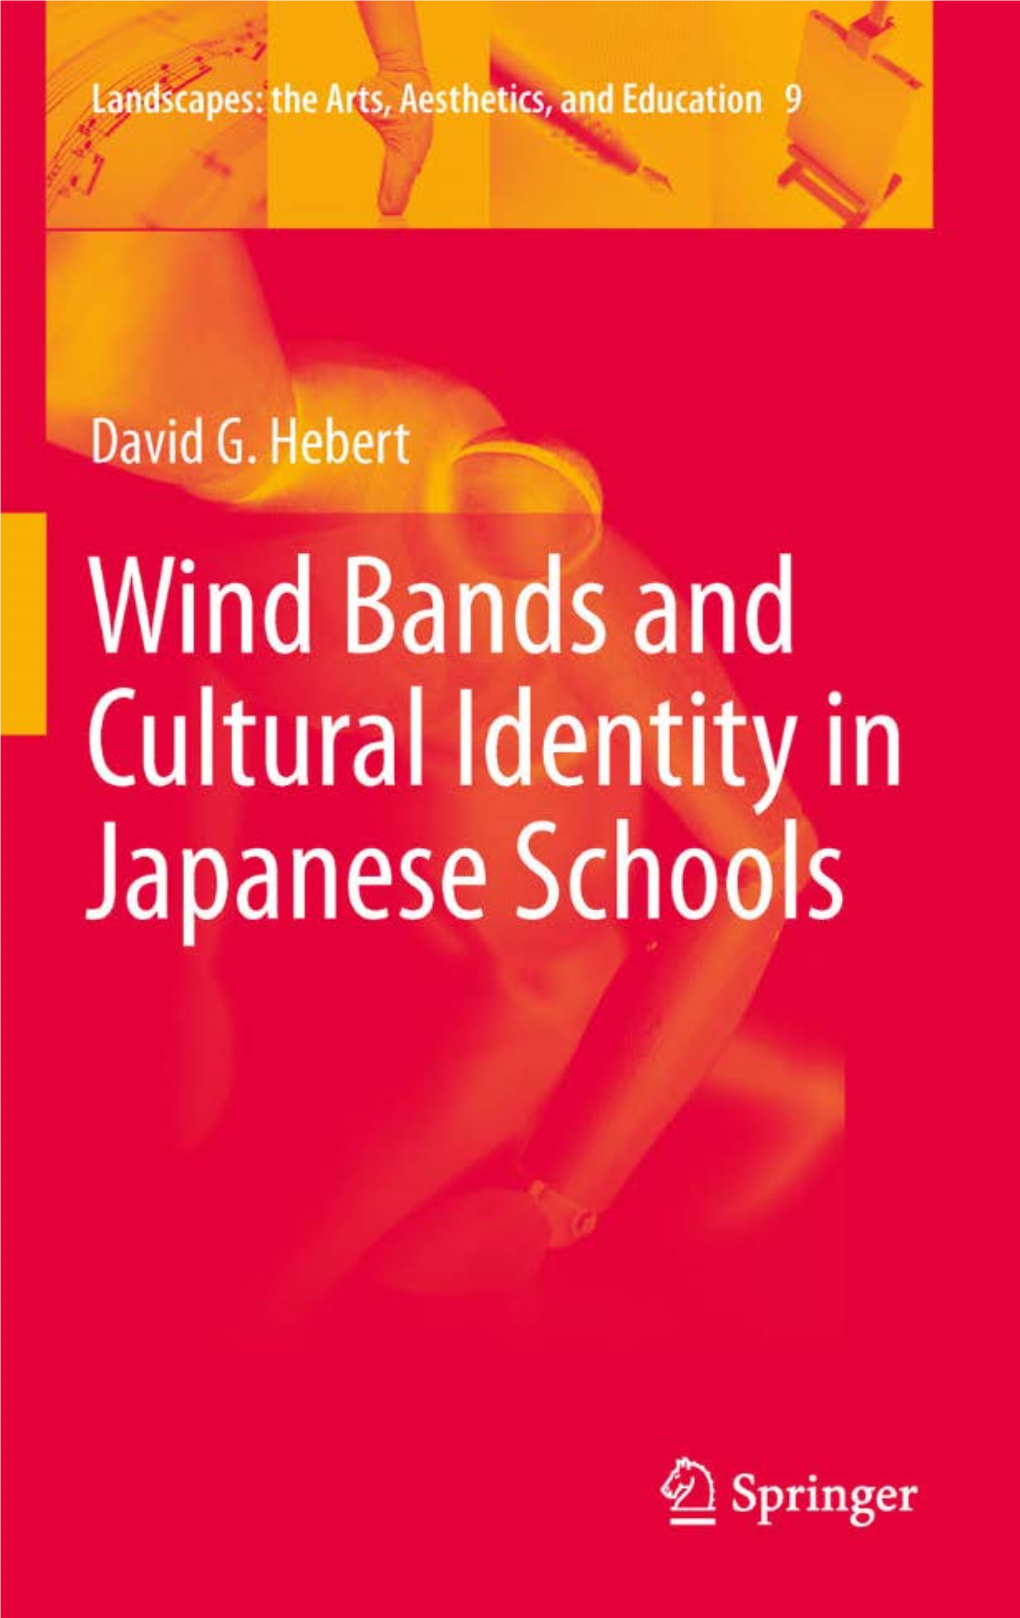 Wind Bands and Cultural Identity in Japanese Schools (Landscapes